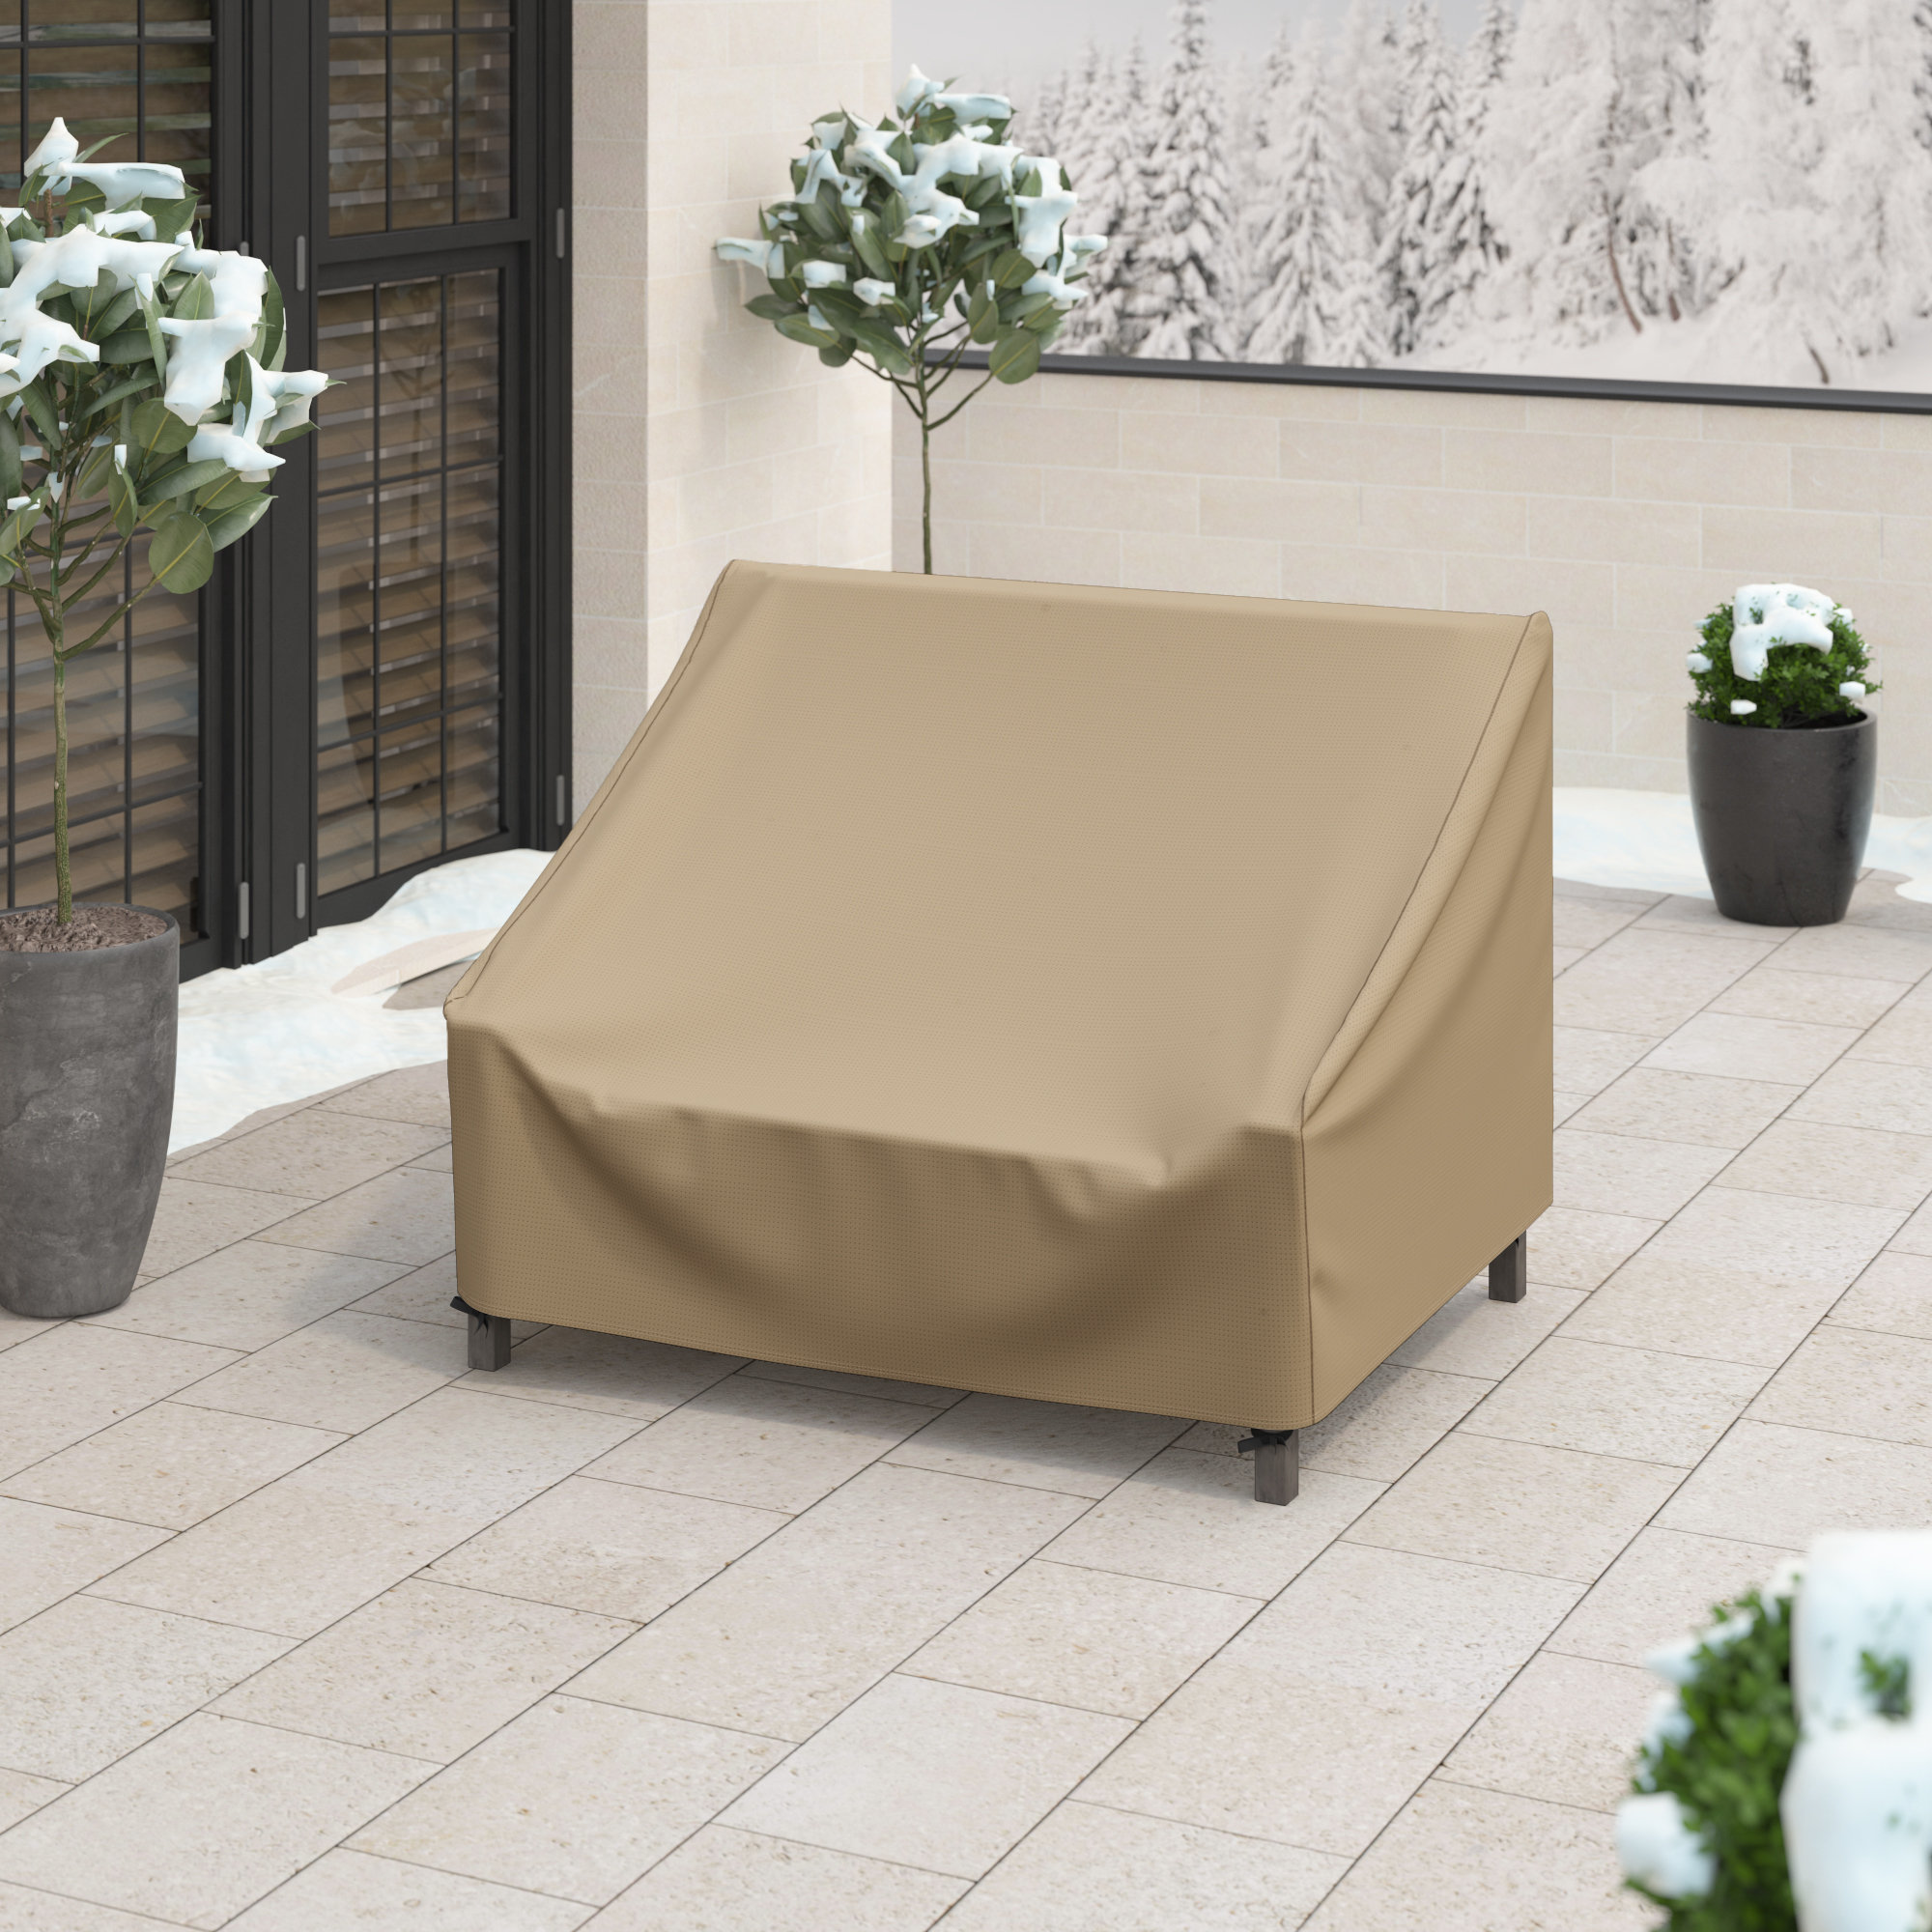 71×36×35 Scratch-Free Soft Interior Water Resistant Breathable 2 Layer Fabric Hentex Cover Outdoor Loveseat and Bench Patio Cover with Rip Stop 